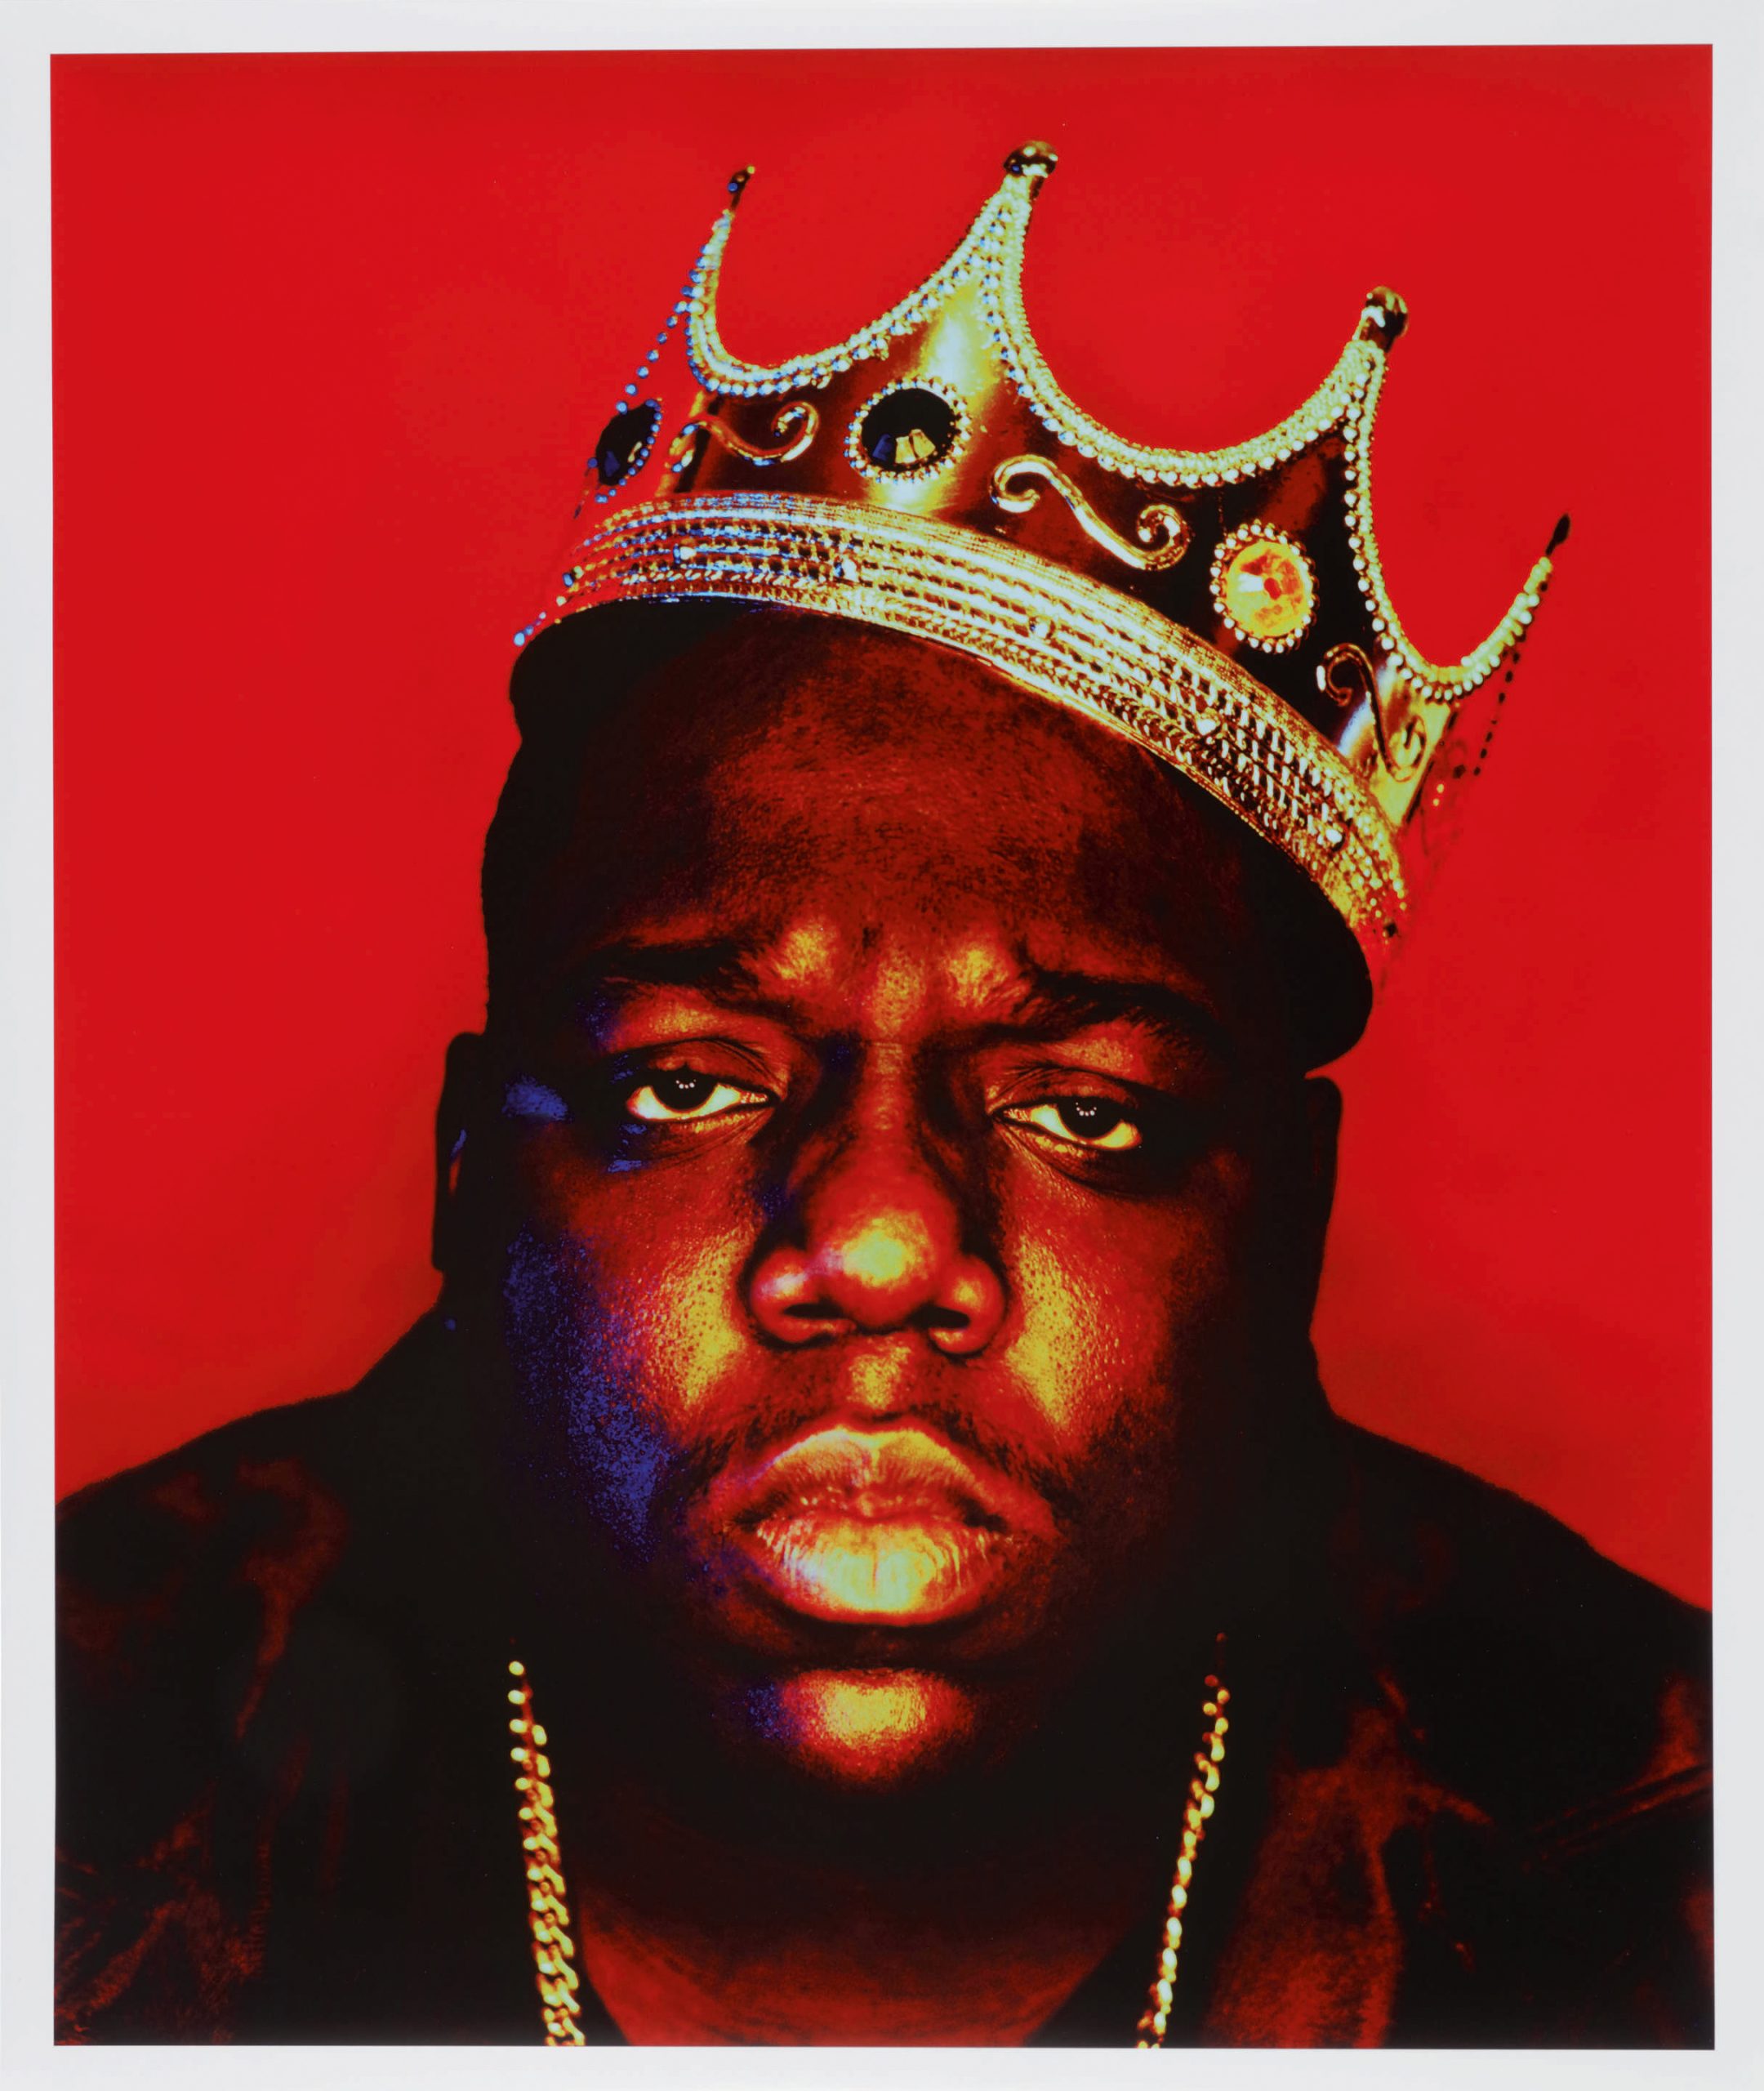 foto iconica-Barron-Claiborne-Notorious-B.I.G.-as-the-K.O.N.Y-King-of-New-York